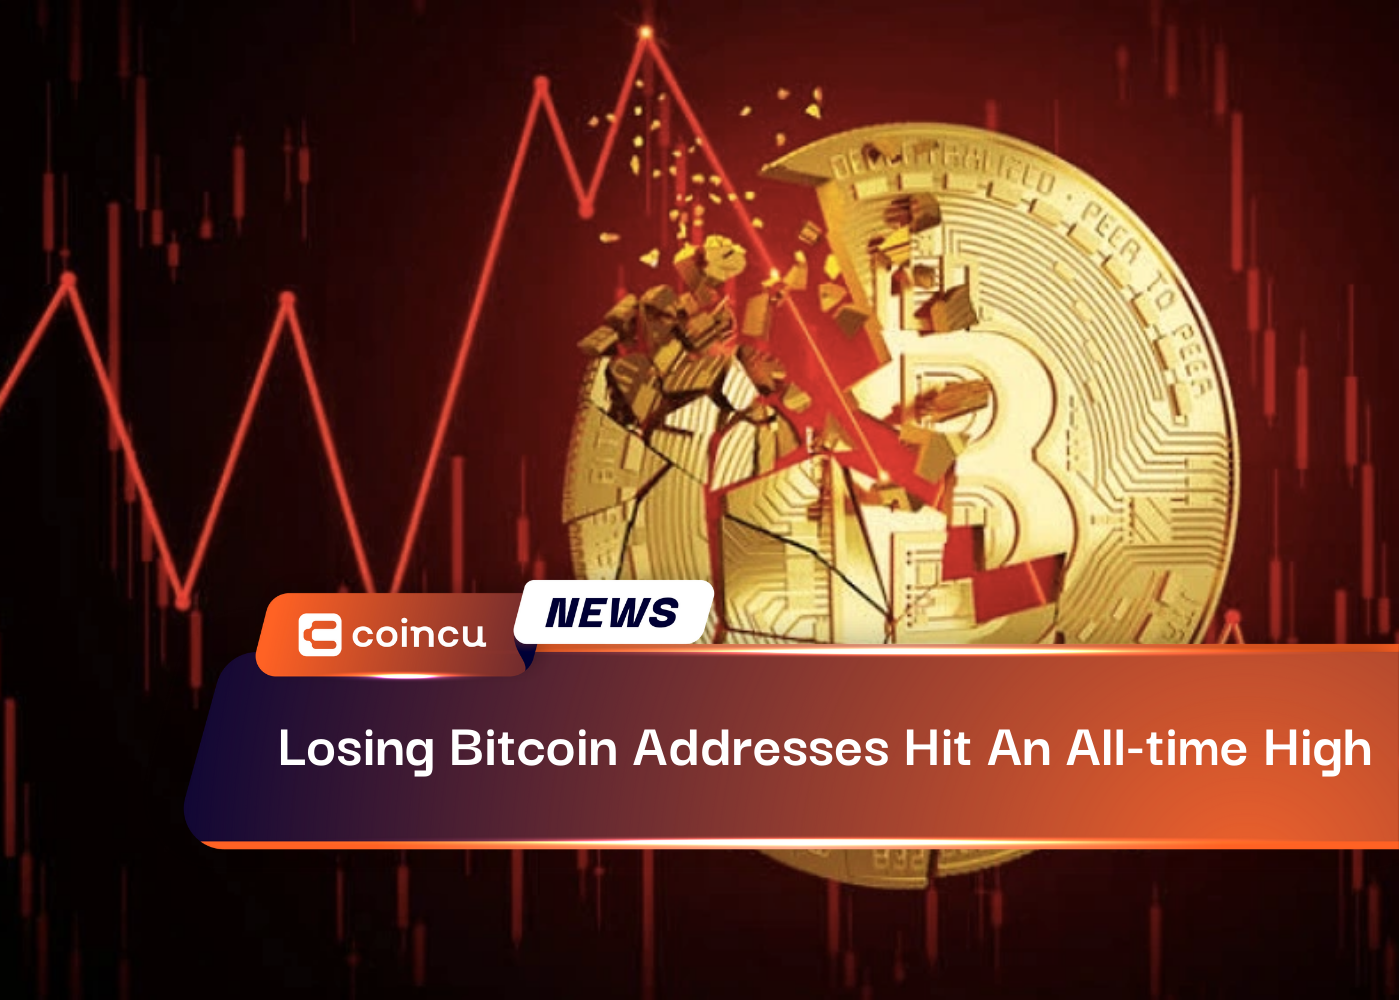 Losing Bitcoin Addresses Hit An All-time High